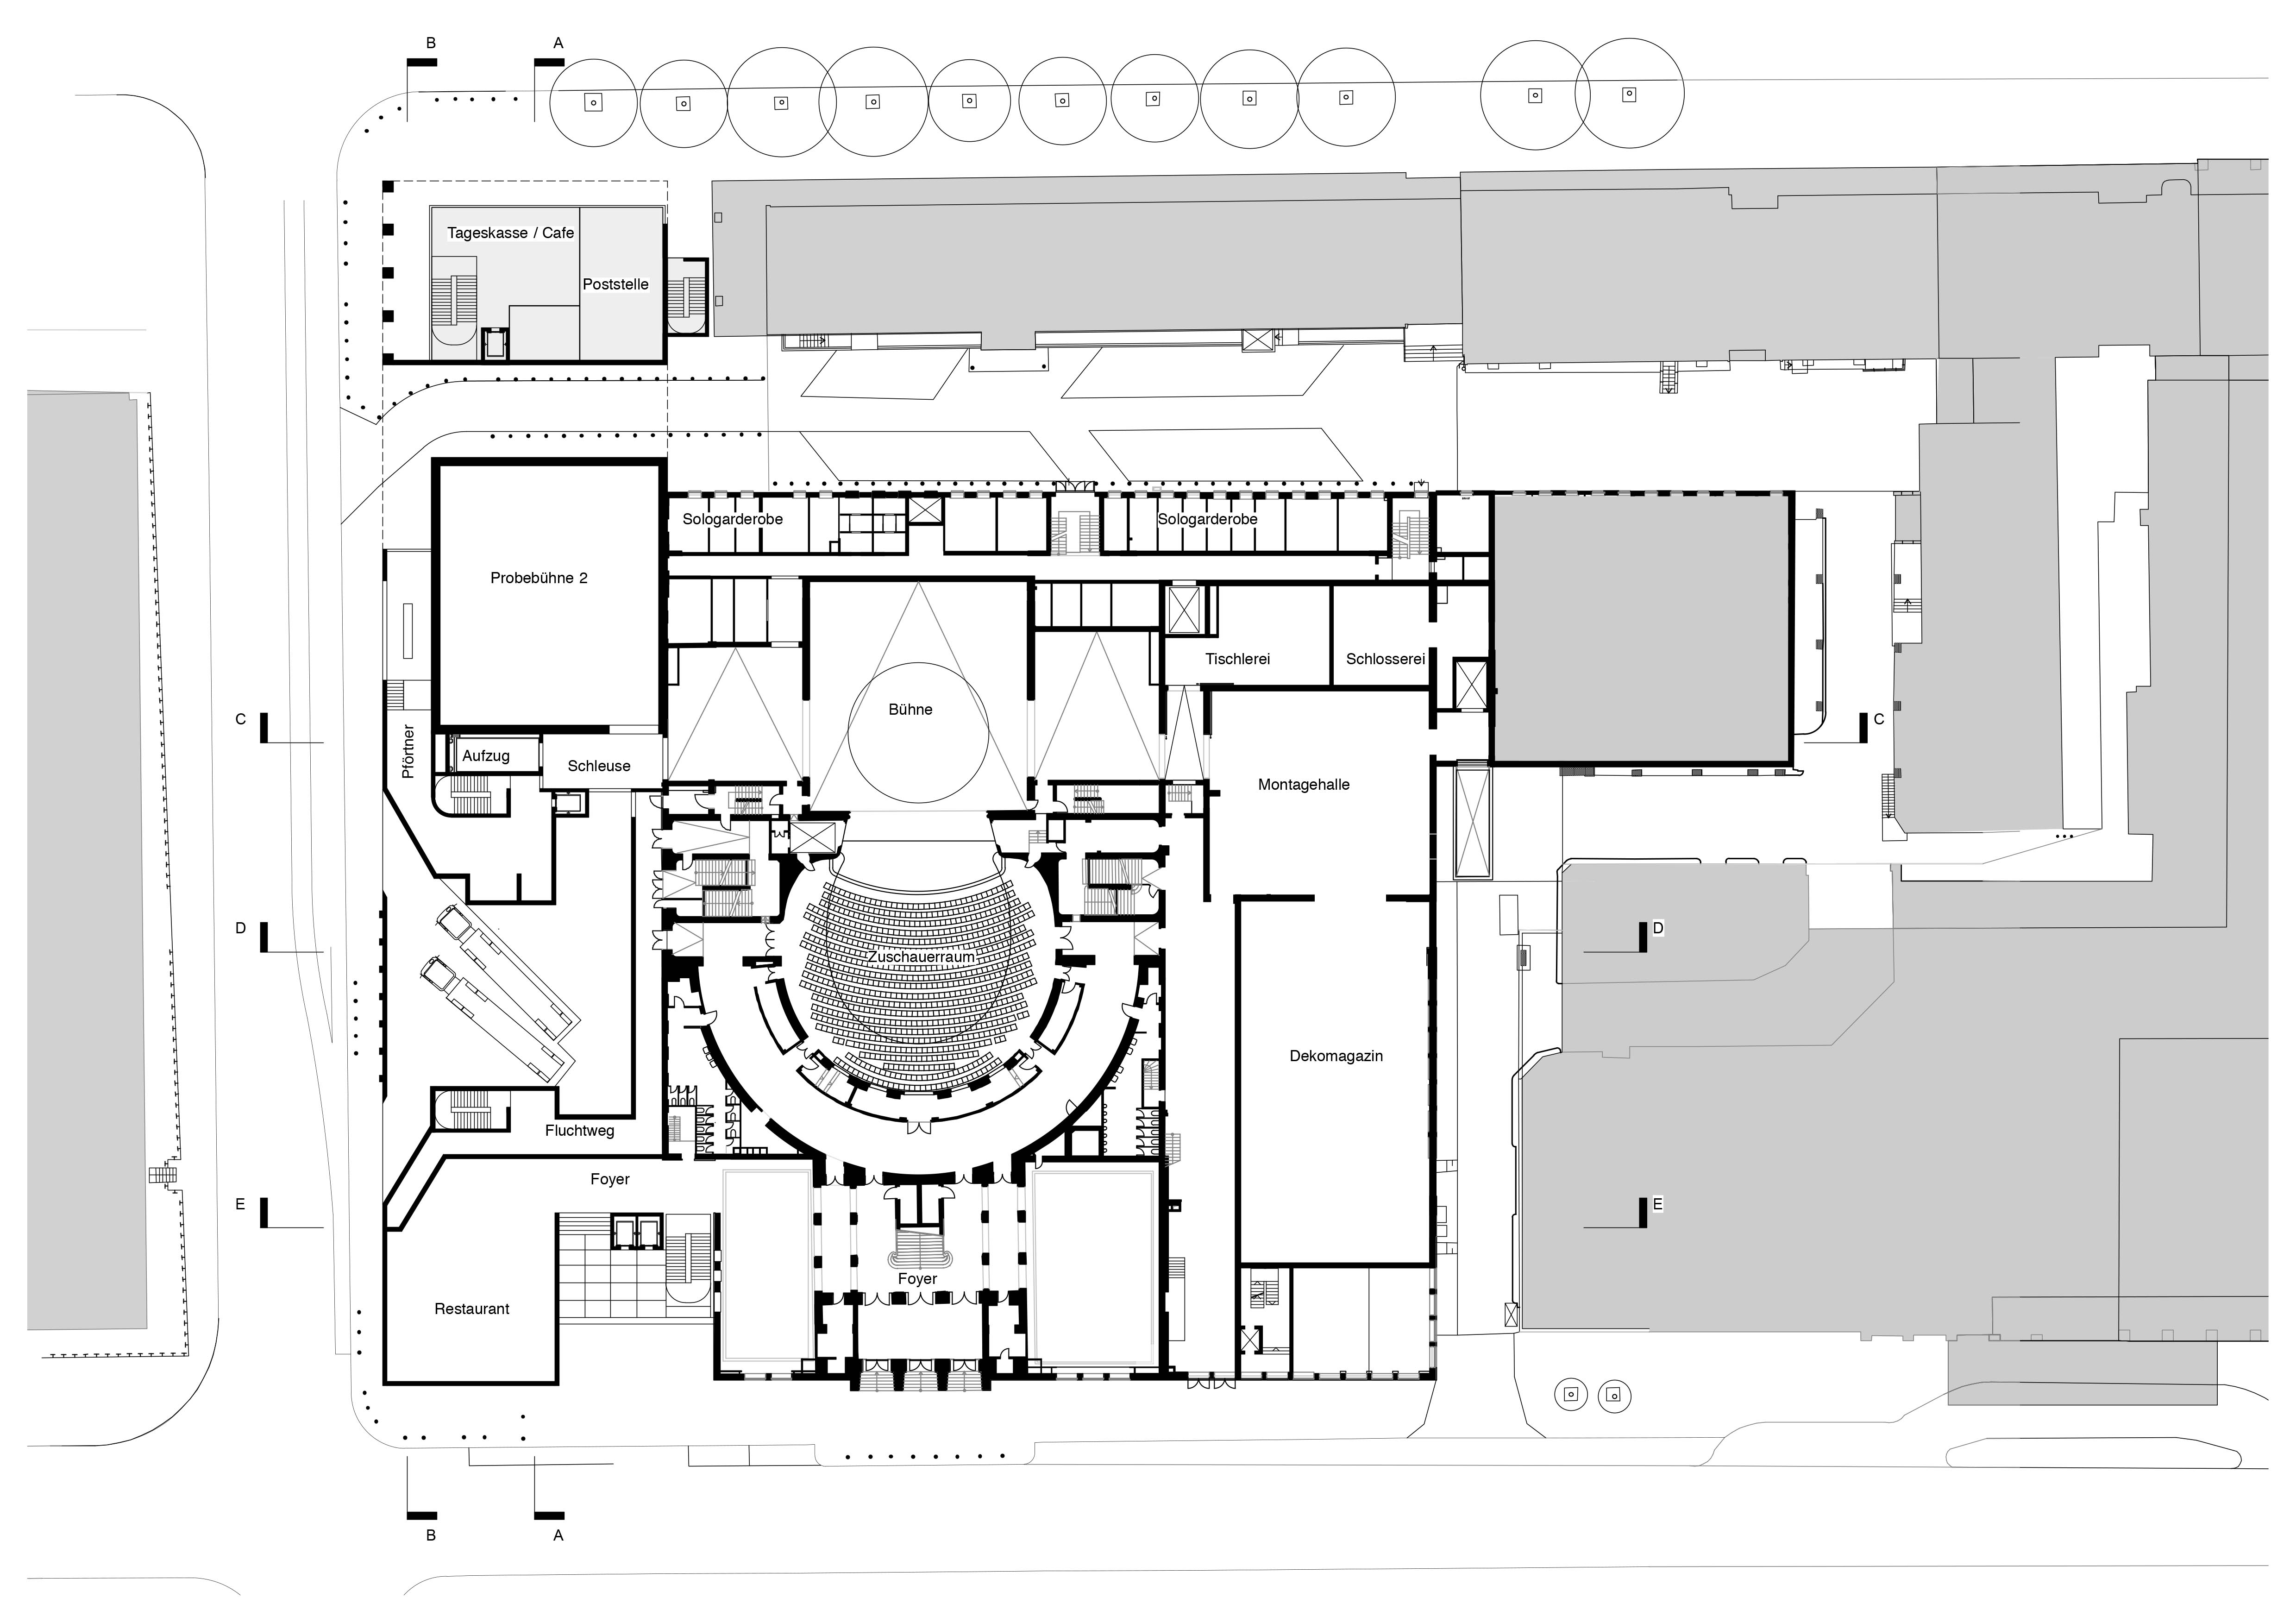 Stage Level Plan Komische Oper Berlin by Keith Williams Architects